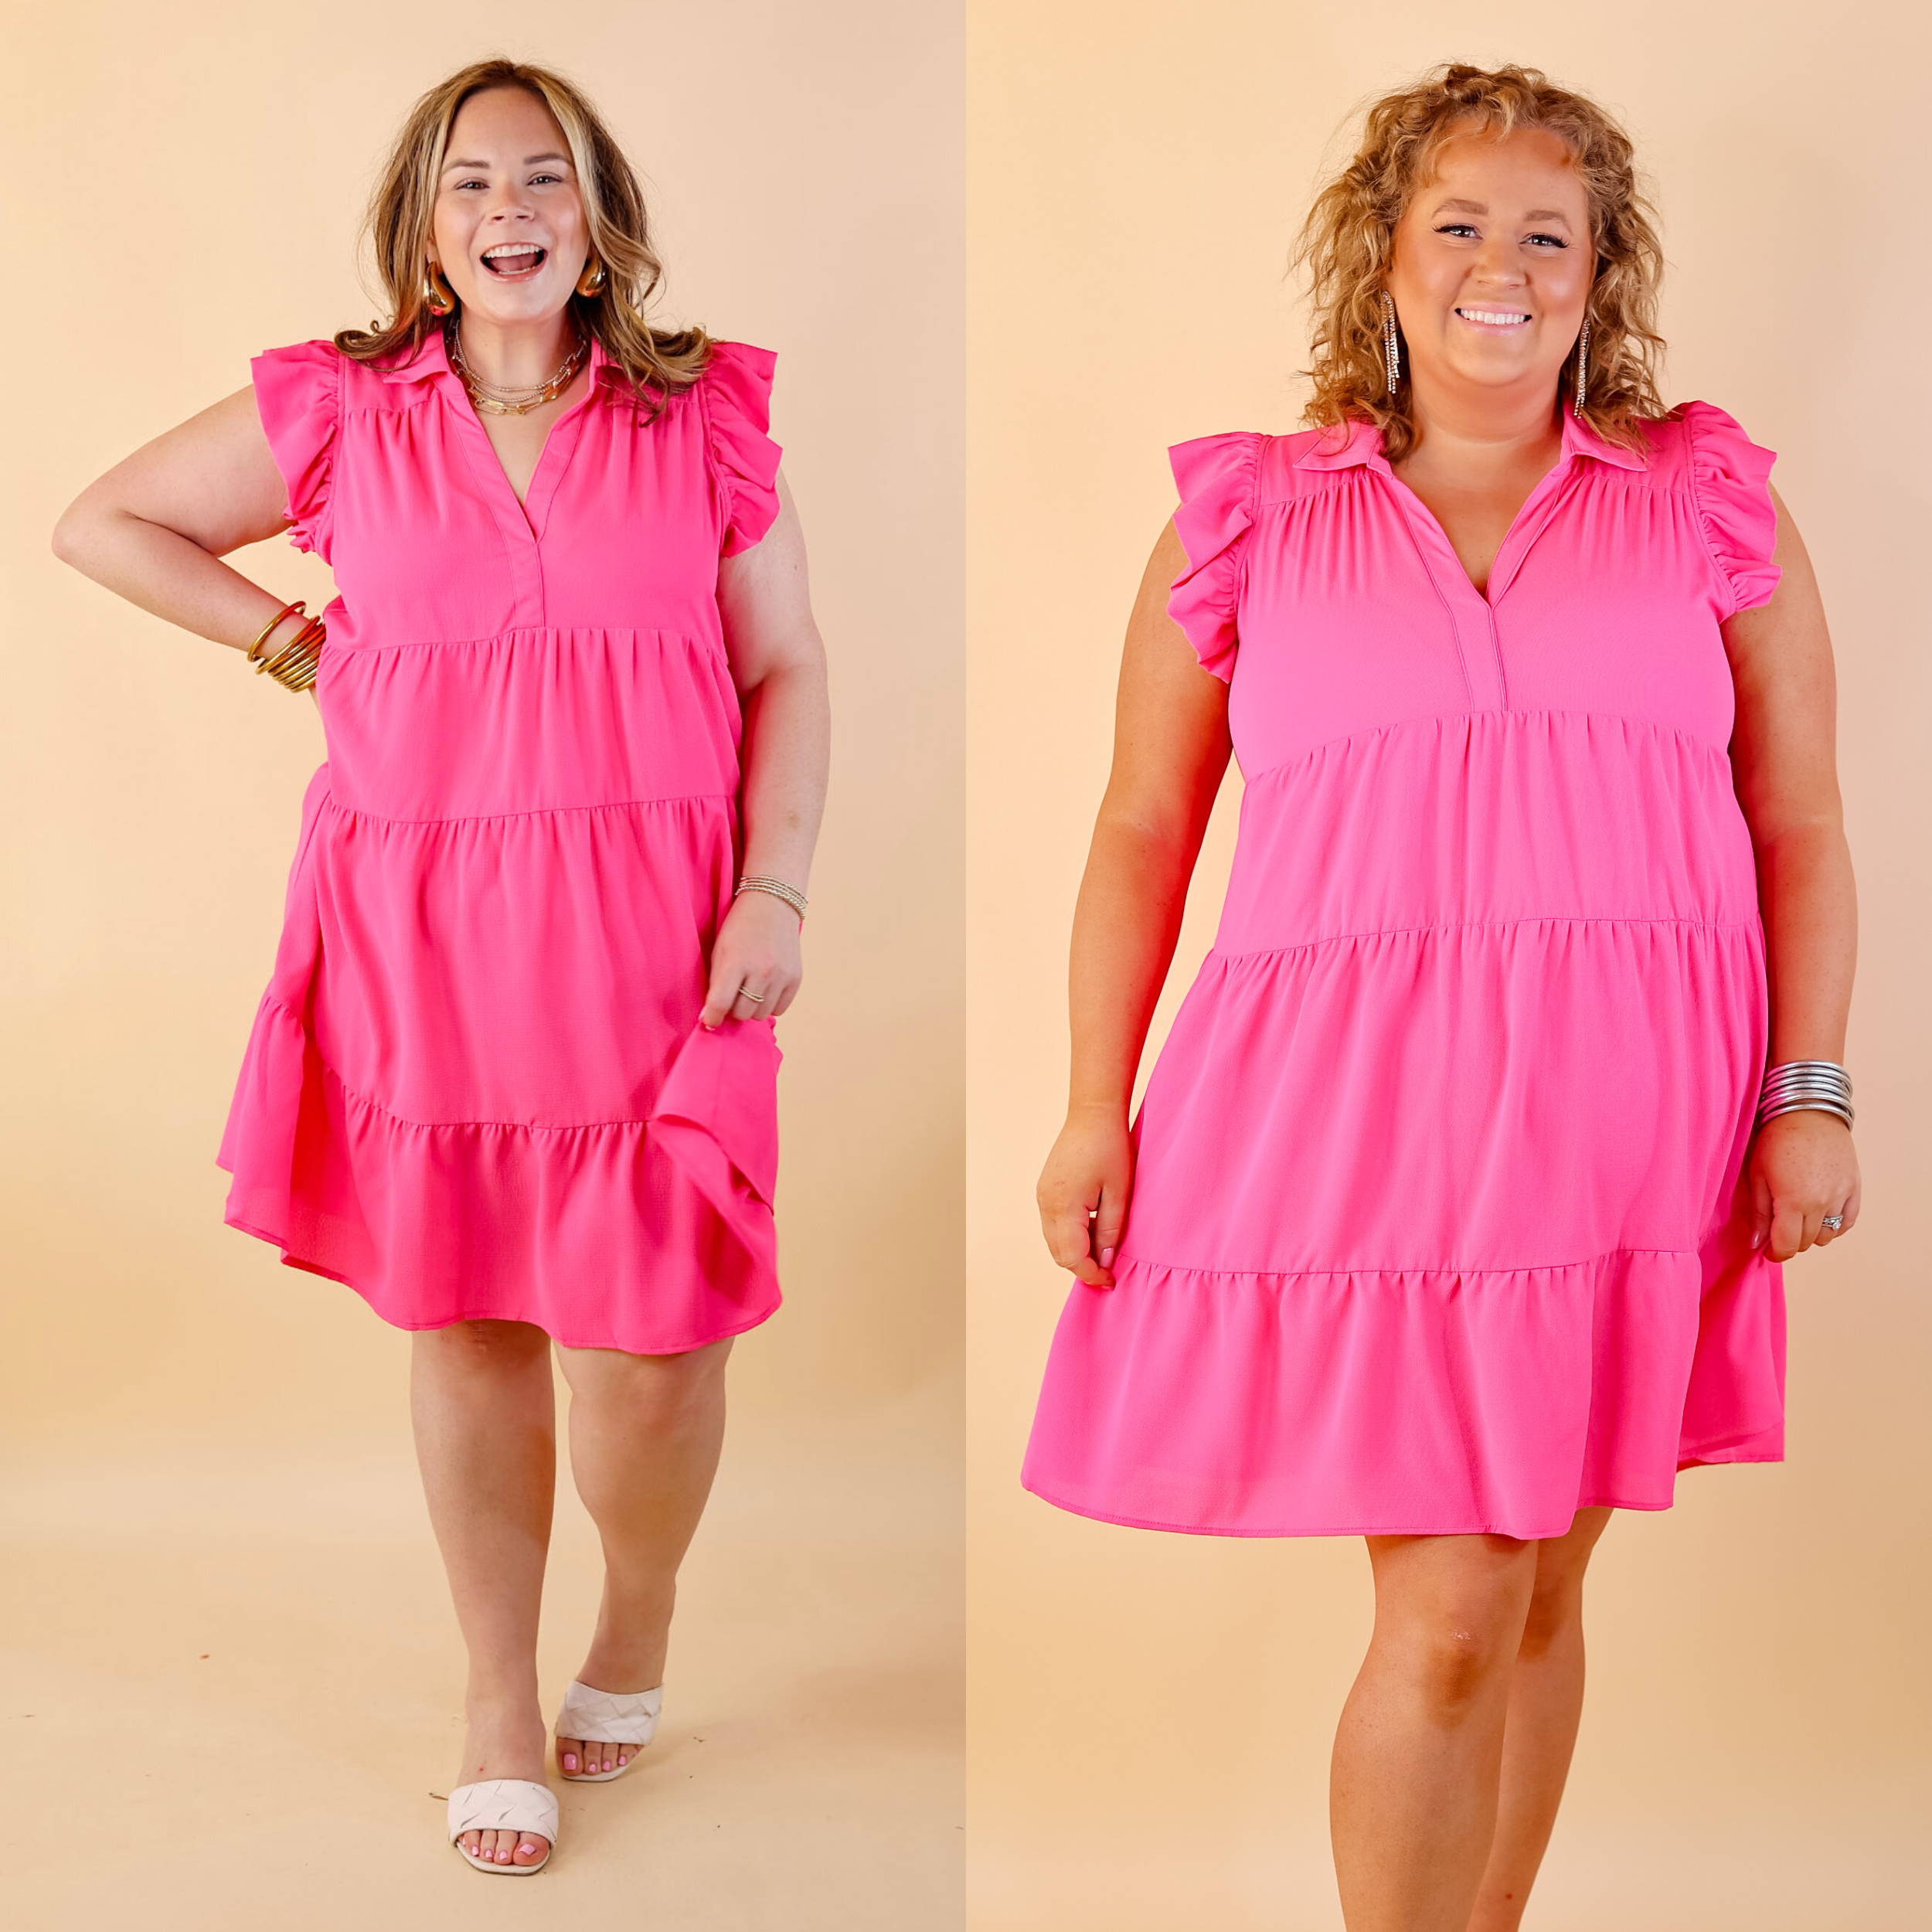 All Of A Sudden Ruffle Cap Sleeve Short Dress in Hot Pink - Giddy Up Glamour Boutique